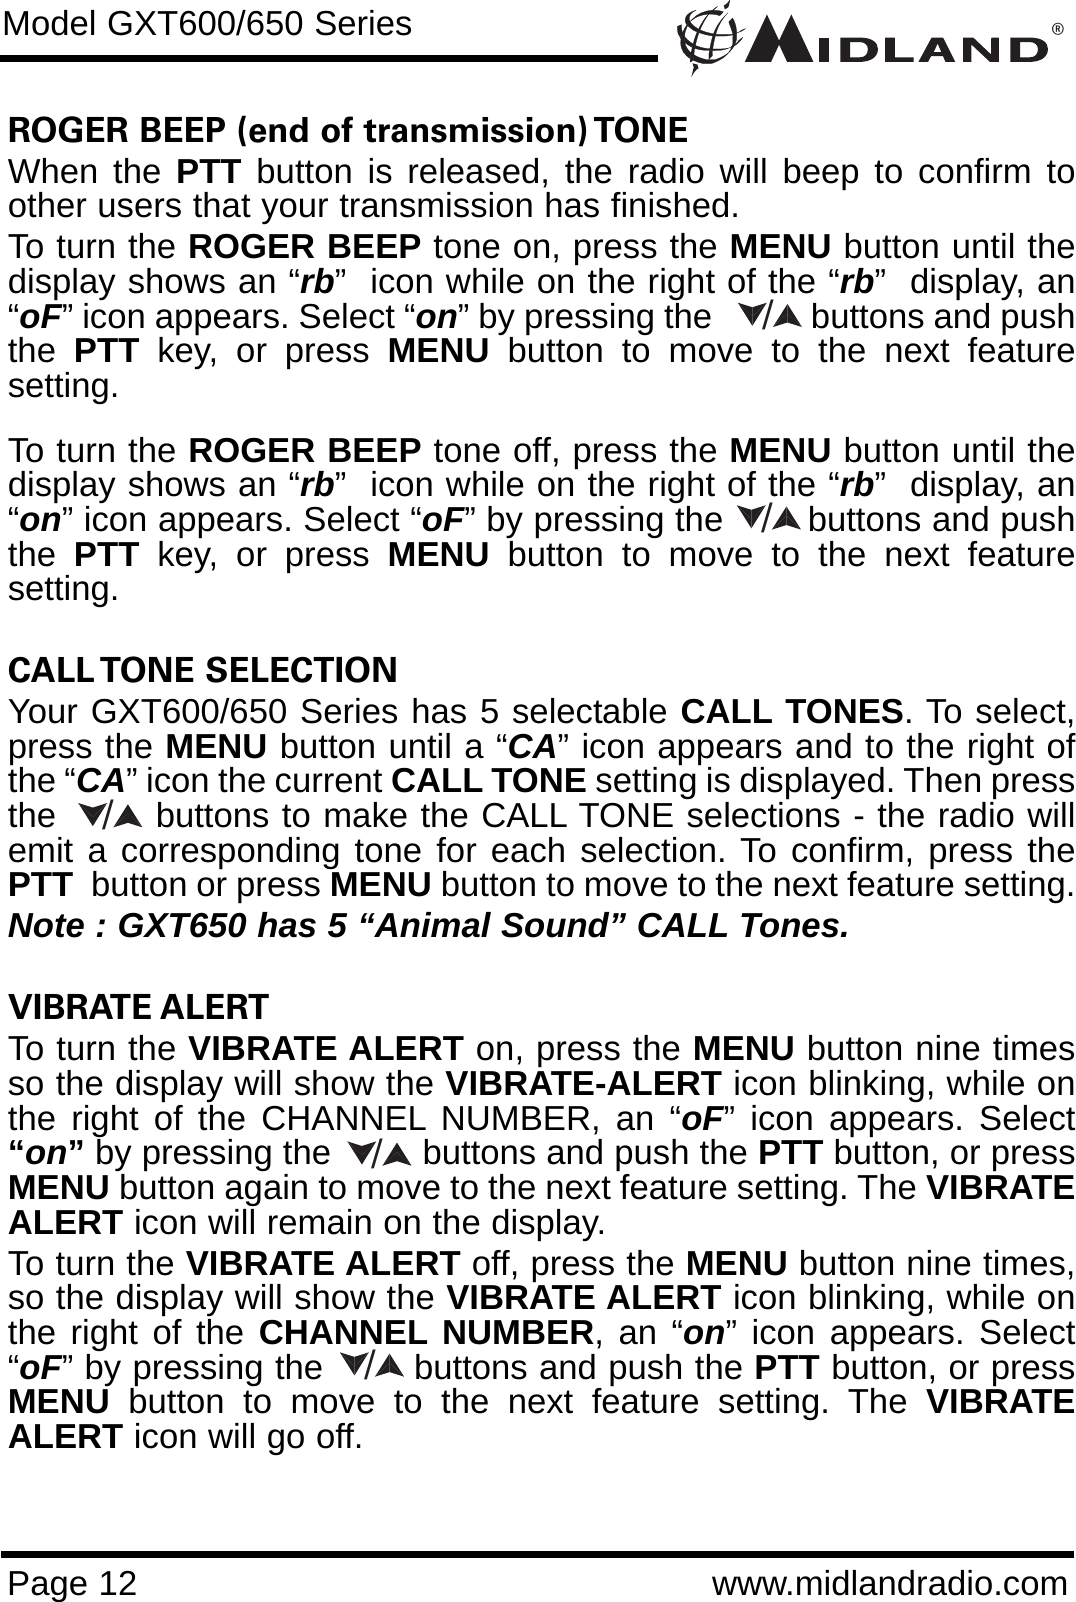 ROGER BEEP (end of transmission) TONE When the PTT button is released, the radio will beep to confirm toother users that your transmission has finished. To turn the ROGER BEEP tone on, press the MENU button until thedisplay shows an “rb”  icon while on the right of the “rb”  display, an“oF” icon appears. Select “on” by pressing the           buttons and pushthe  PTT key, or press MENU button to move to the next featuresetting. To turn the ROGER BEEP tone off, press the MENU button until thedisplay shows an “rb”  icon while on the right of the “rb”  display, an“on” icon appears. Select “oF” by pressing the        buttons and pushthe  PTT key, or press MENU button to move to the next featuresetting.CALL TONE  SELECTION Your GXT600/650 Series has 5 selectable CALL TONES. To select,press the MENU button until a “CA” icon appears and to the right ofthe “CA” icon the current CALL TONE setting is displayed. Then pressthe        buttons to make the CALL TONE selections - the radio willemit a corresponding tone for each selection. To confirm, press thePTT button or press MENU button to move to the next feature setting.Note : GXT650 has 5 “Animal Sound” CALL Tones.VIBRATE ALERT To turn the VIBRATE ALERT on, press the MENU button nine timesso the display will show the VIBRATE-ALERT icon blinking, while onthe right of the CHANNEL NUMBER, an “oF” icon appears. Select“on”by pressing the         buttons and push the PTT button, or pressMENU button again to move to the next feature setting. The VIBRATEALERT icon will remain on the display.To turn the VIBRATE ALERT off, press the MENU button nine times,so the display will show the VIBRATE ALERT icon blinking, while onthe right of the CHANNEL NUMBER, an “on” icon appears. Select“oF” by pressing the        buttons and push the PTT button, or pressMENU button to move to the next feature setting. The VIBRATEALERT icon will go off.®Page 12 www.midlandradio.comModel GXT600/650 Series/////